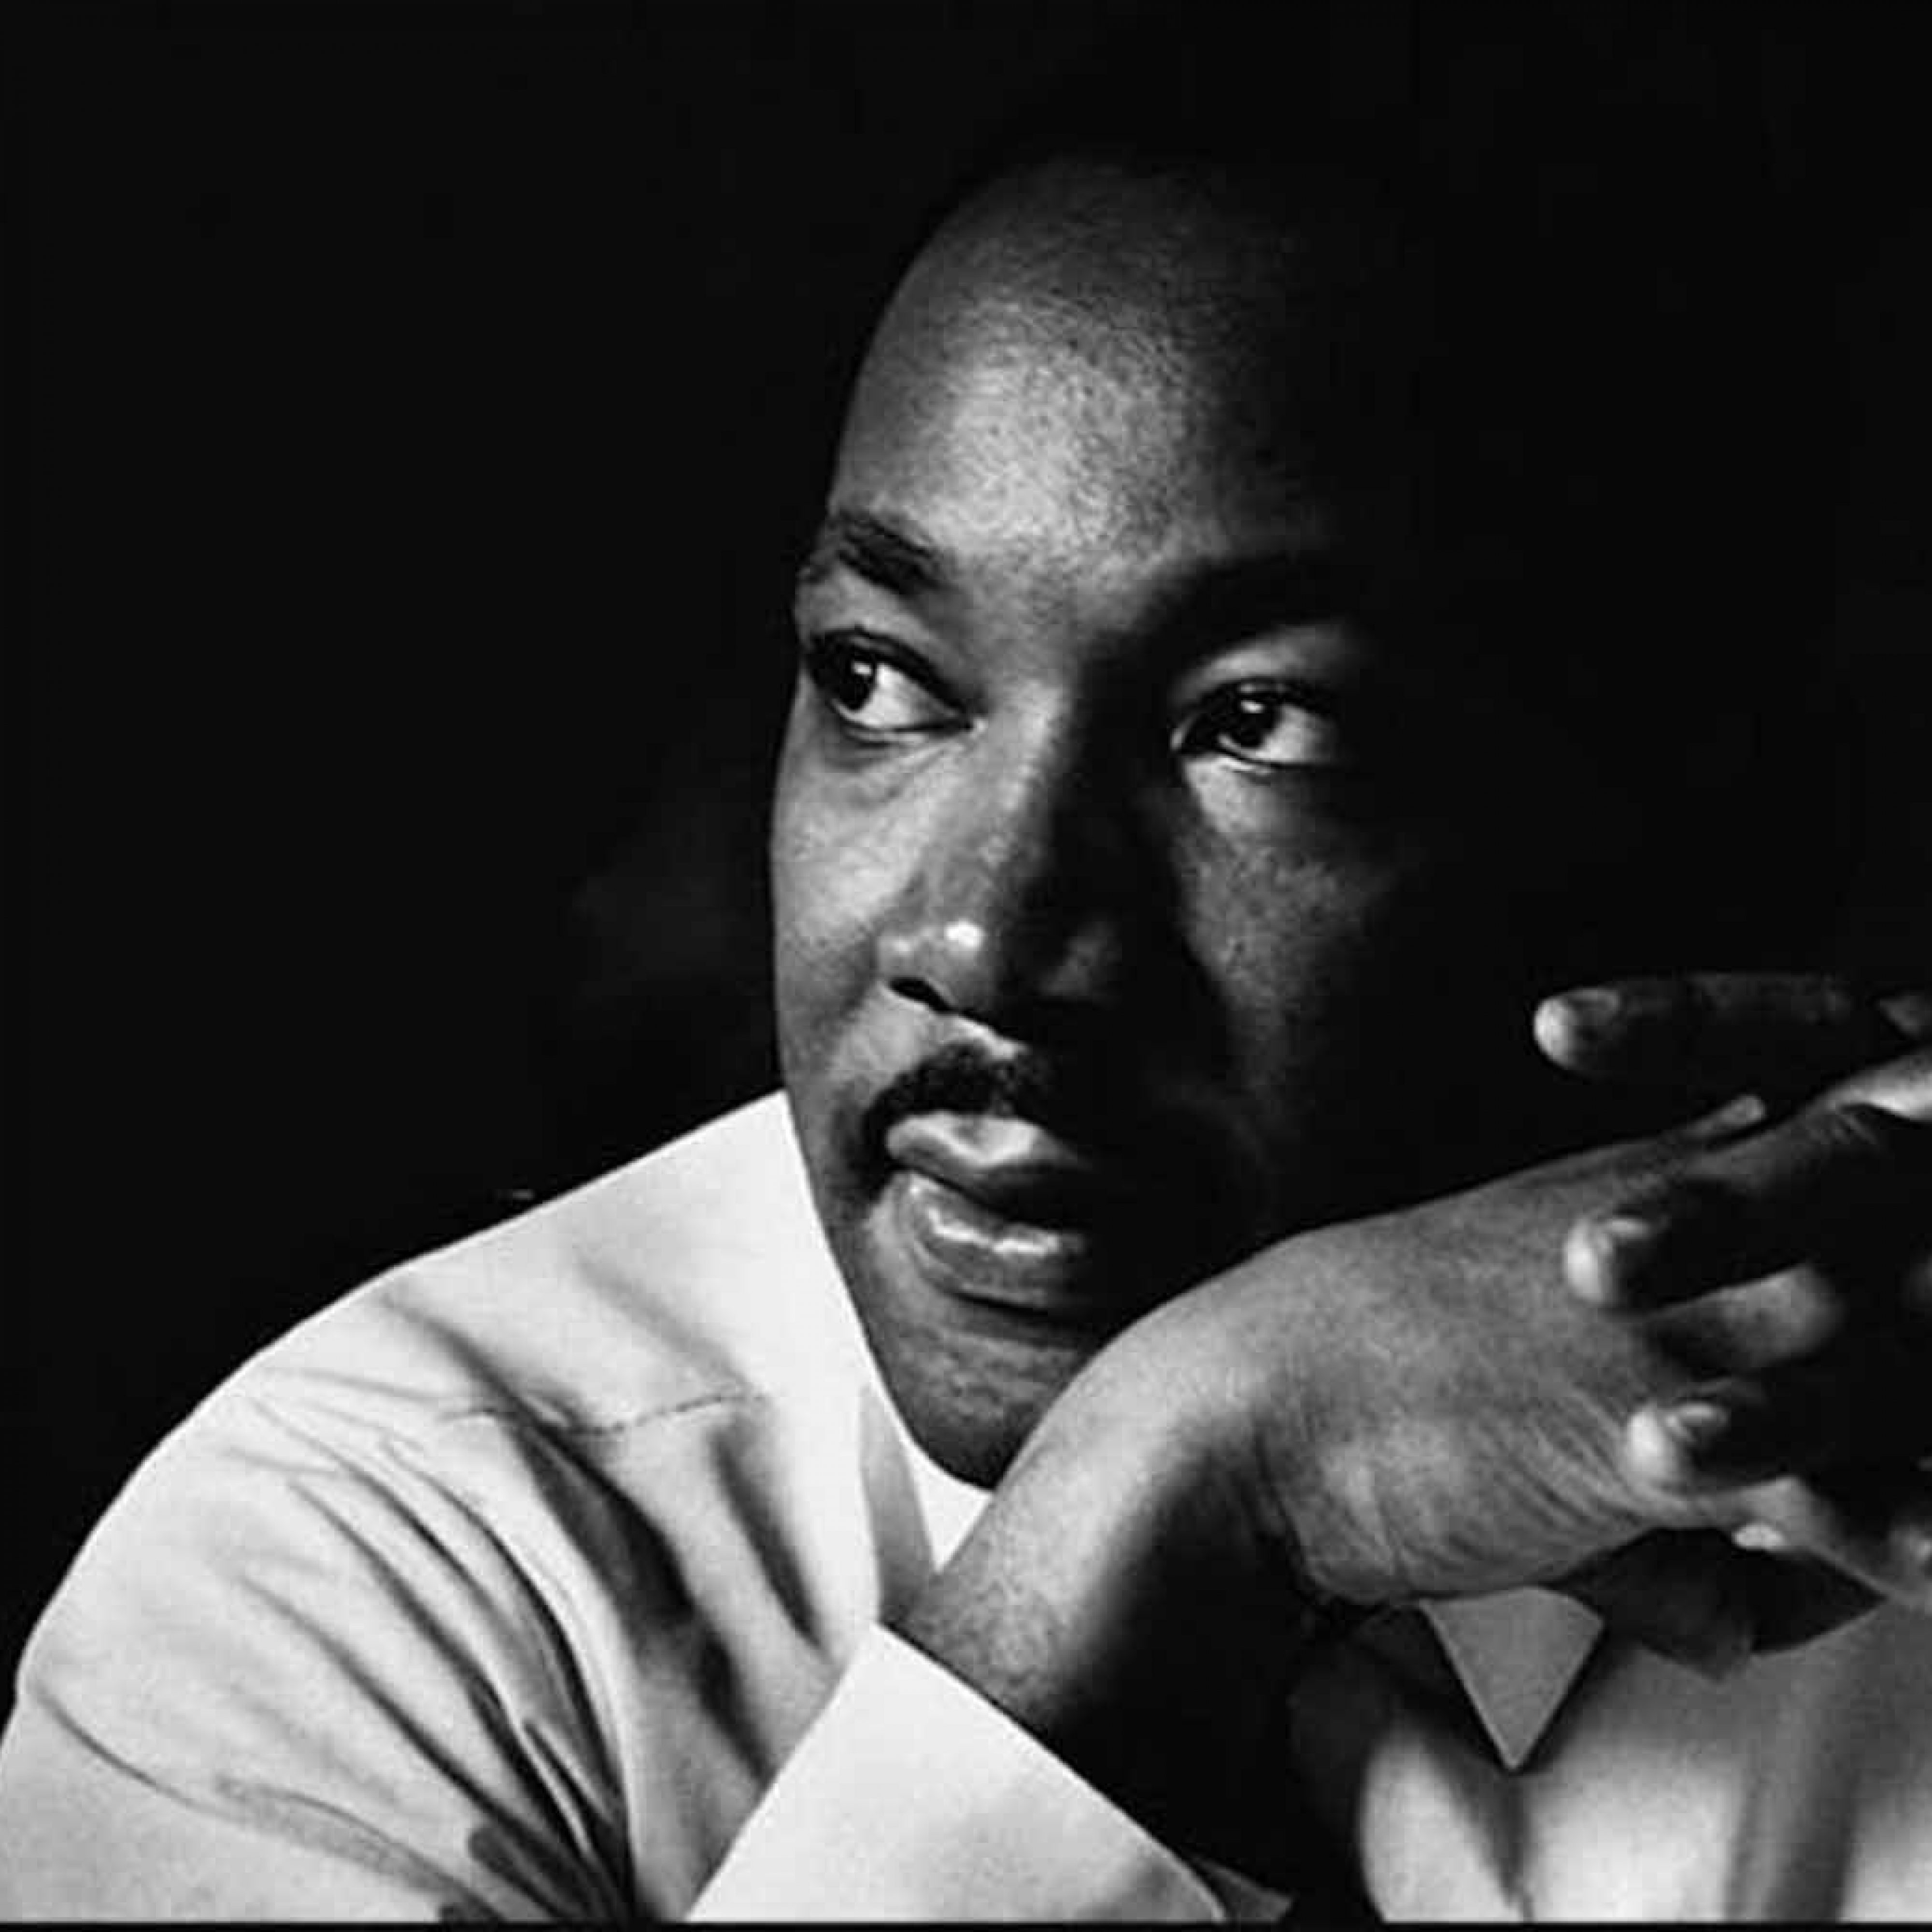 5 Simple Ways to Keep Dr. King’s Dream Alive